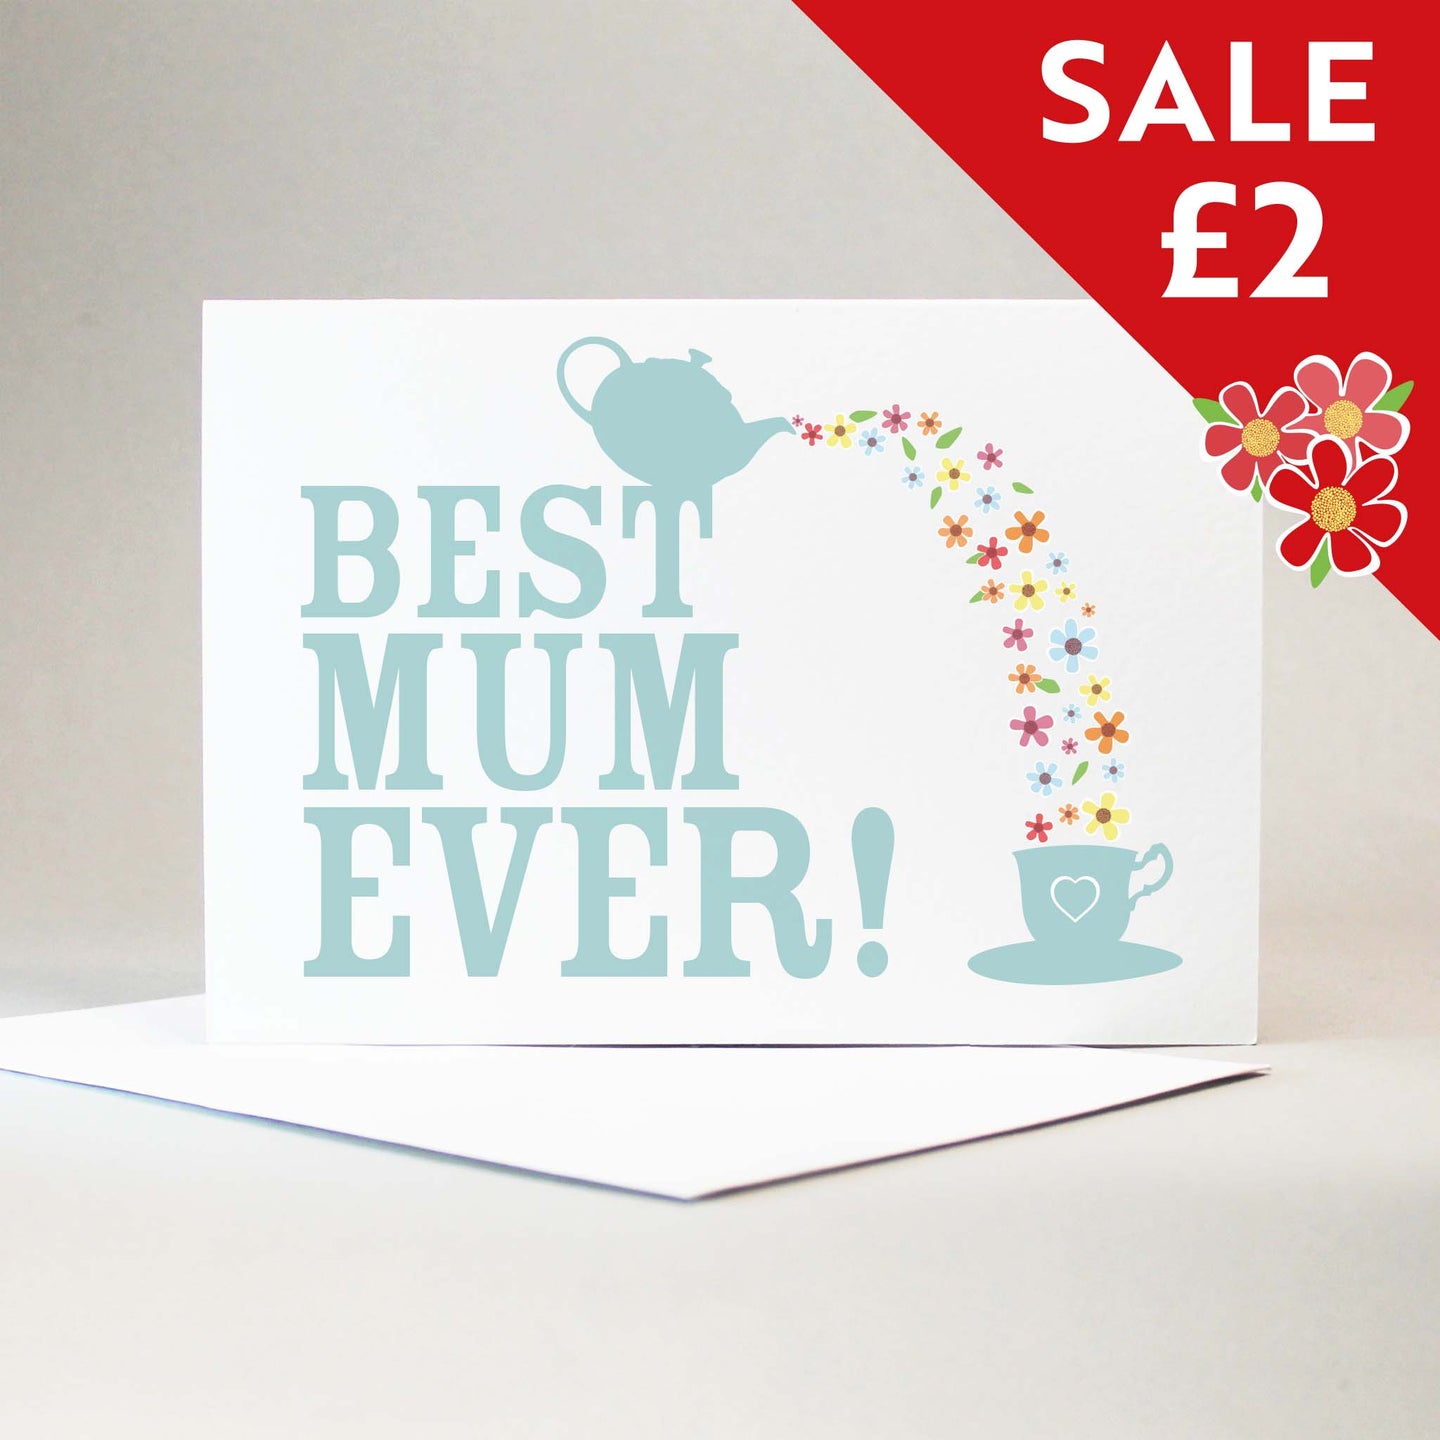 Best Mum Ever lettering with a small teal coloured teapot pouring flowers into a dainty teacup below for sale at £2.